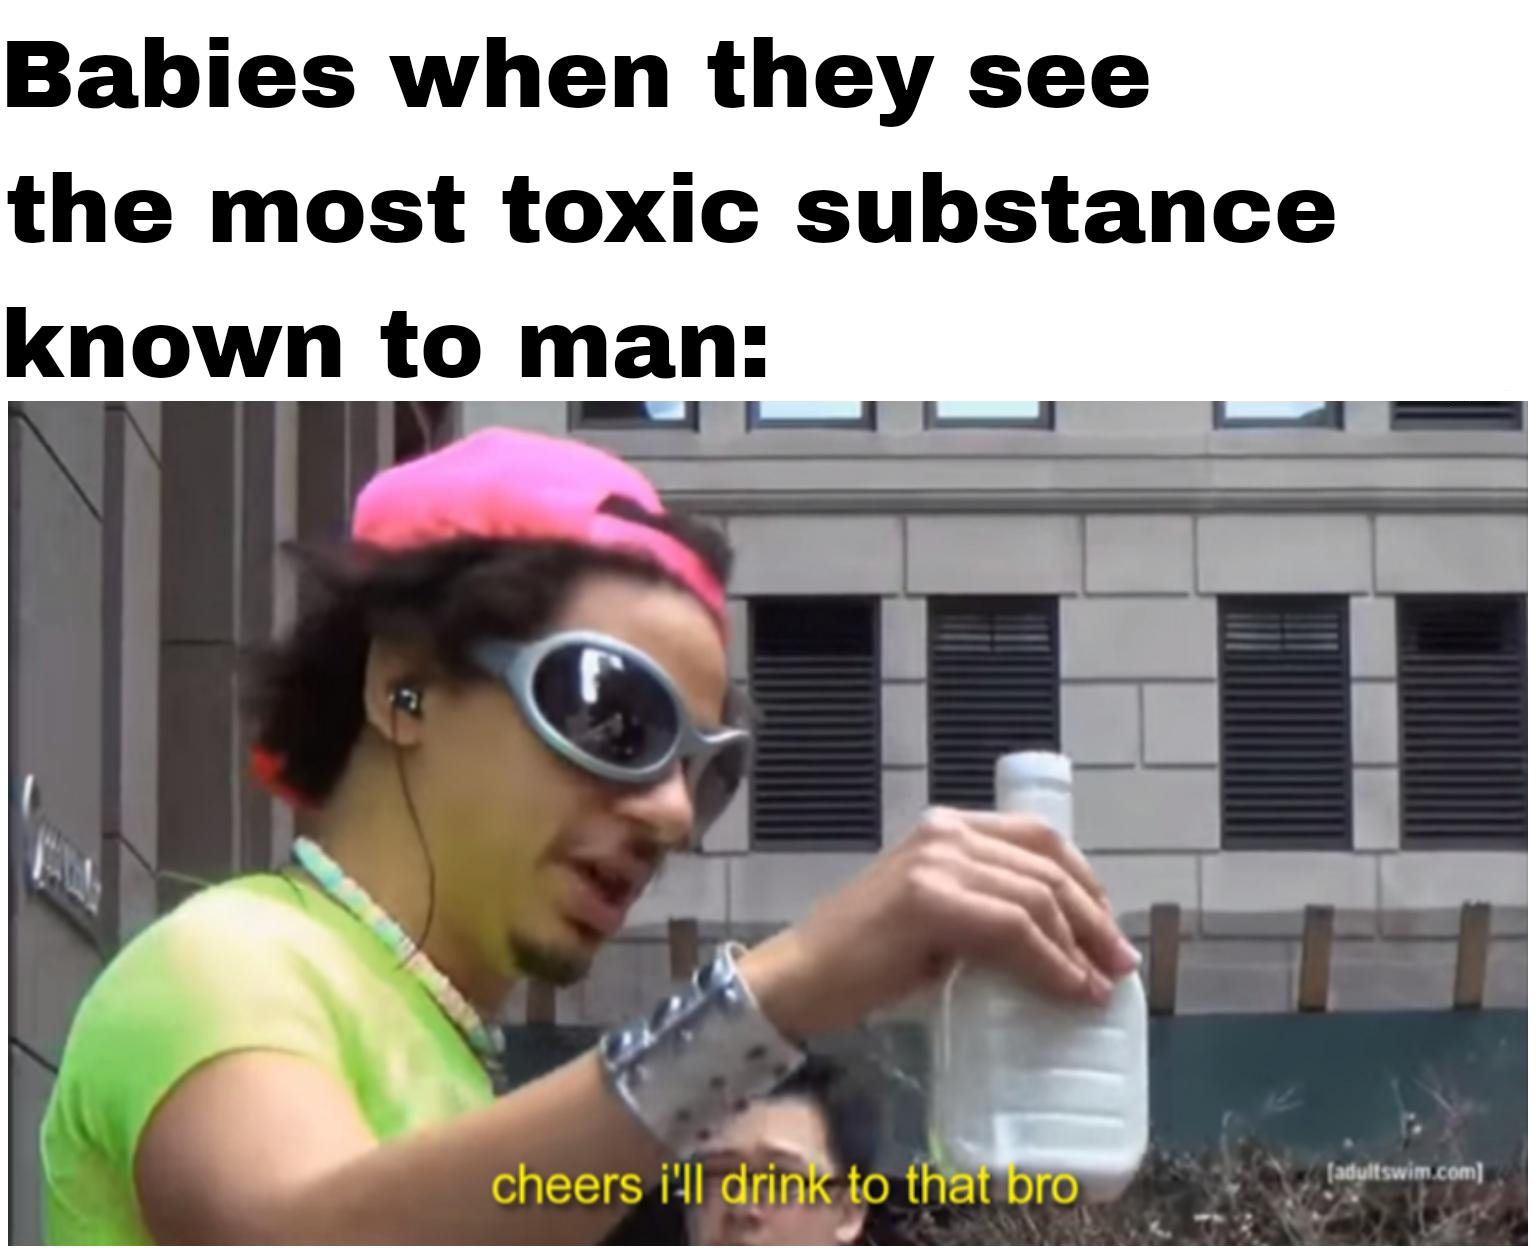 meme stream - cool - Babies when they see the most toxic substance known to man cheers i'll drink to that bro adultswim.com